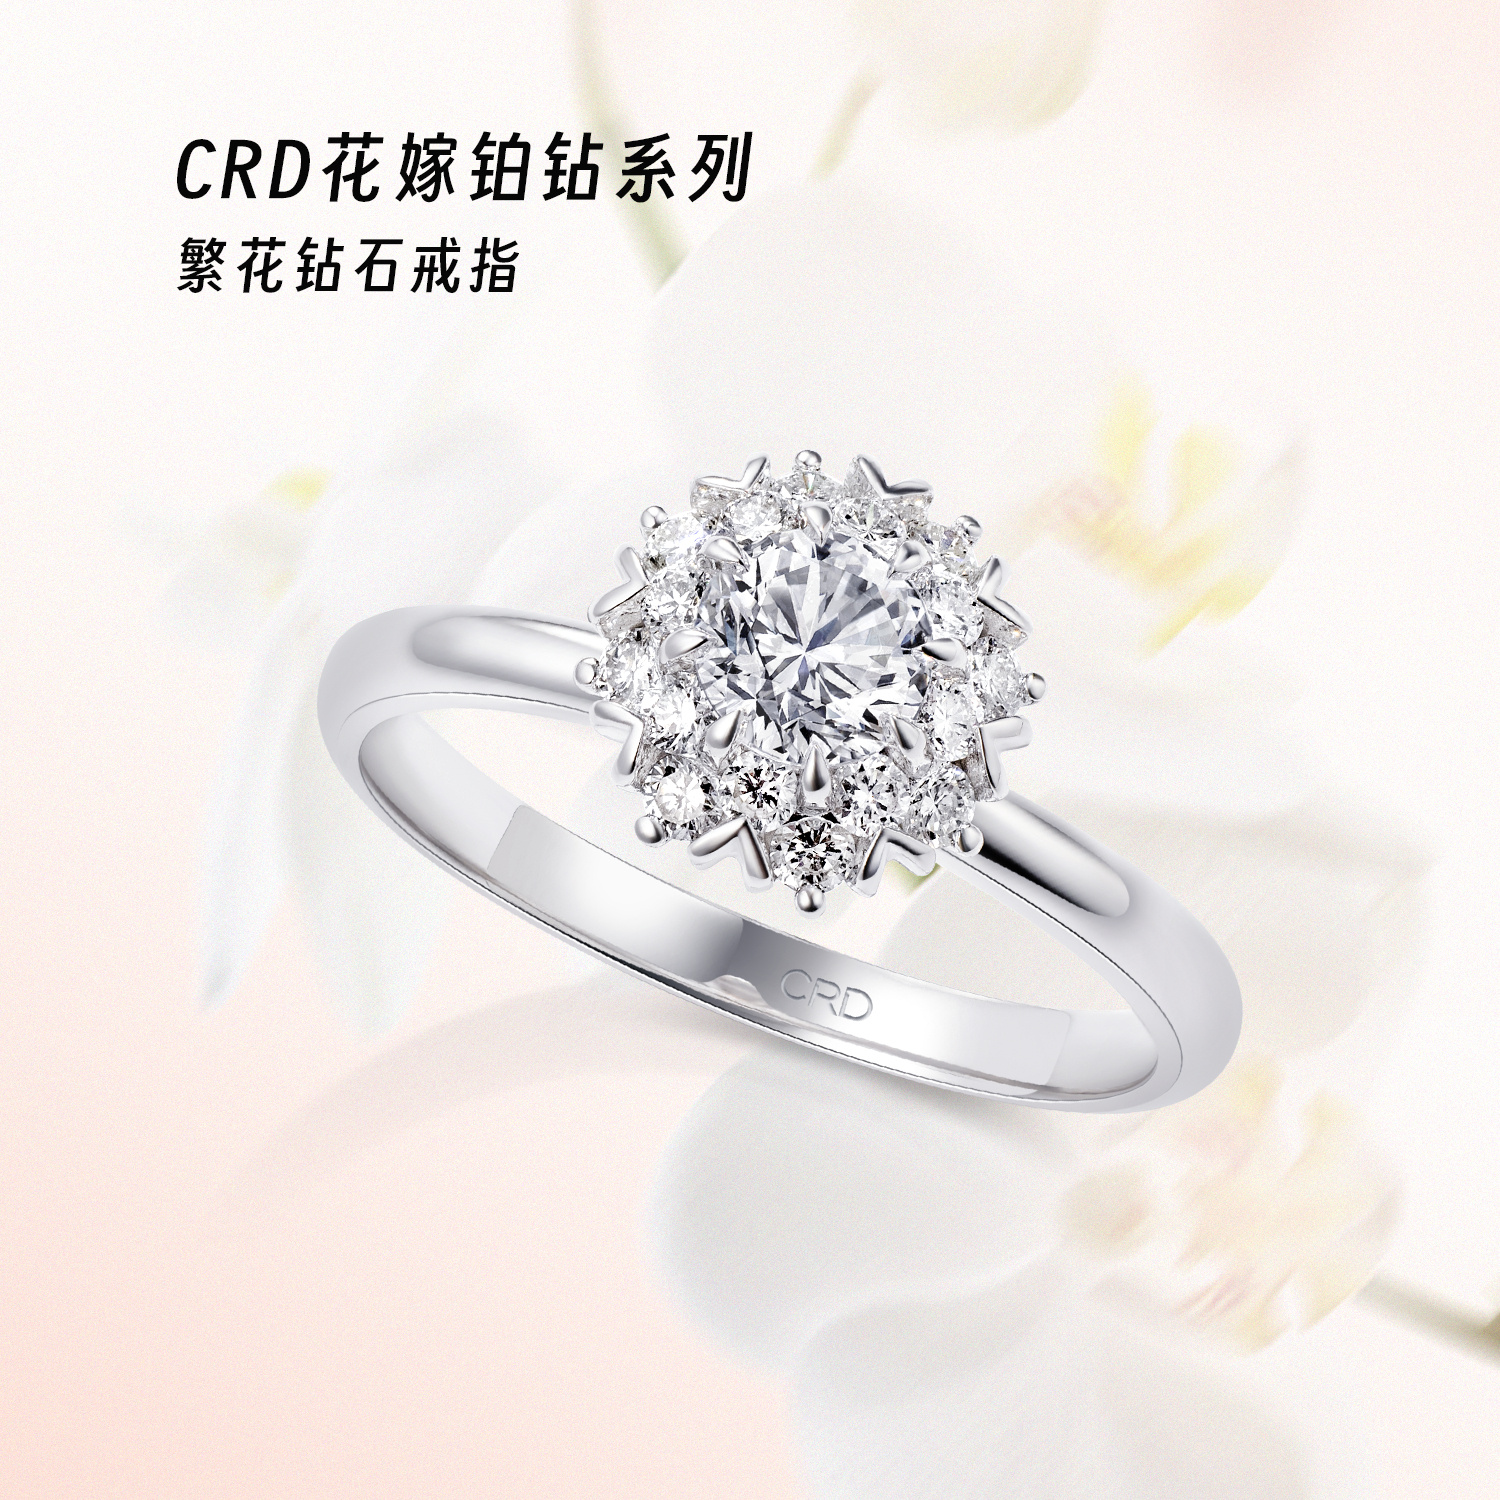 CRD花嫁<a href="https://www.crd.cn/" target="_blank" style="color:#927658;text-decoration:underline;">钻戒</a>续写浪漫遐想